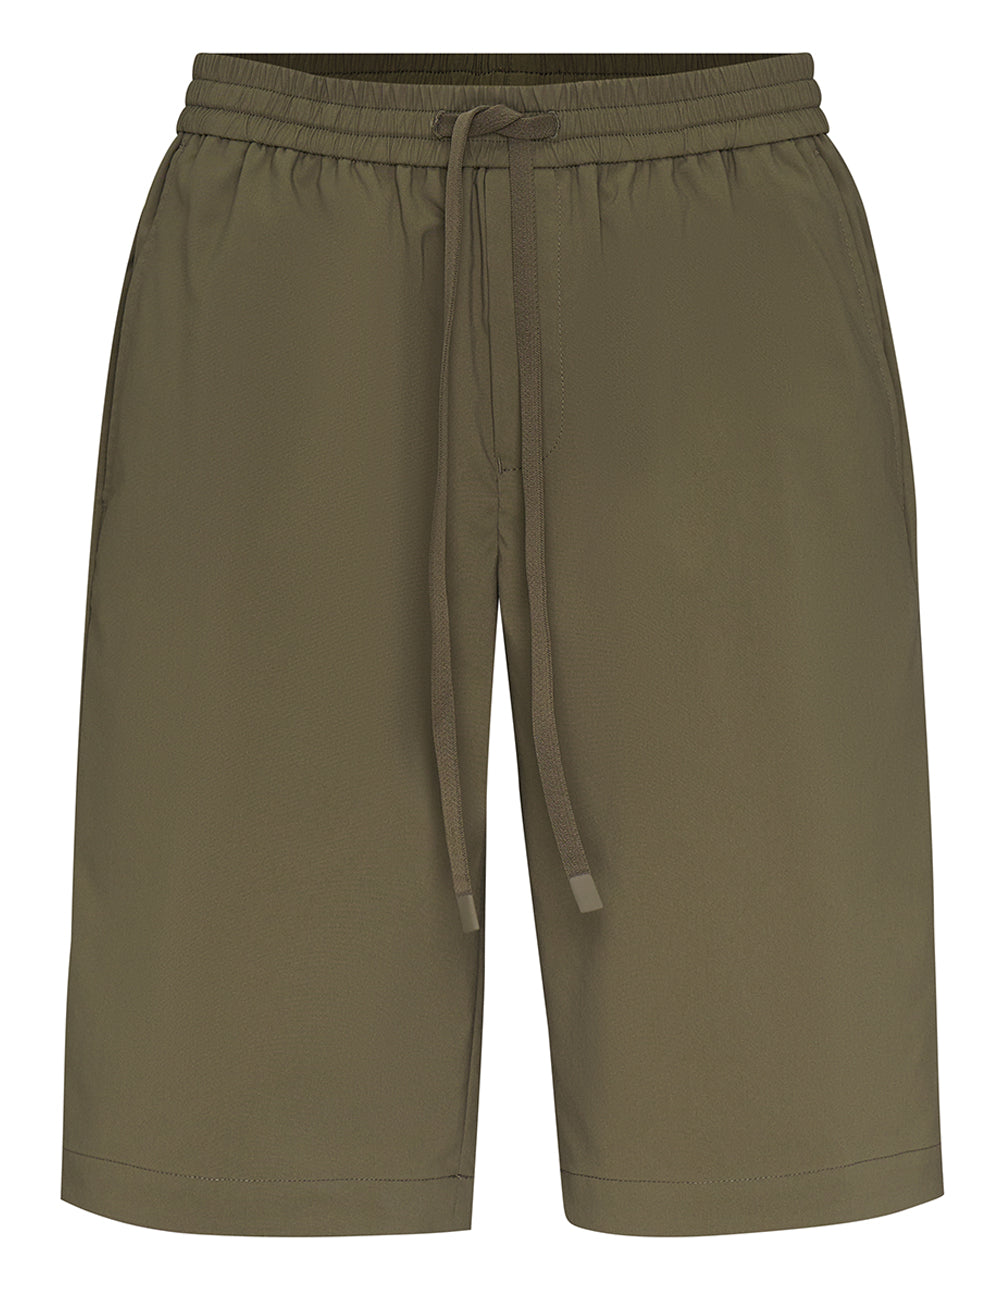 Exposed Drawcord Elasticated Shorts